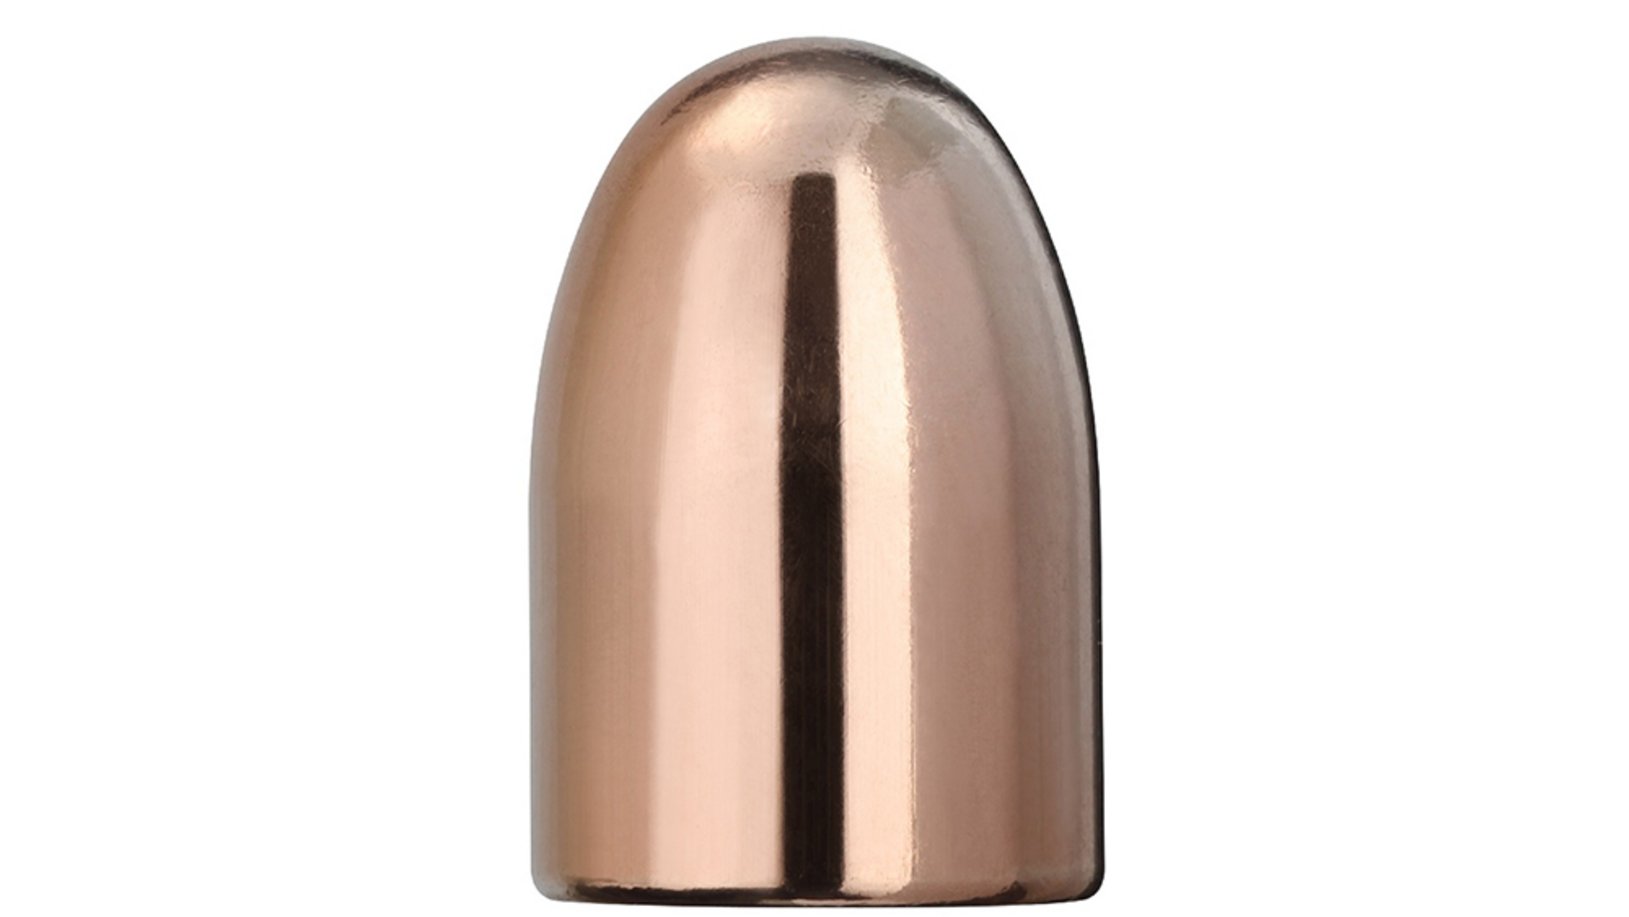 Frontview of ammunition of GECO FULL METAL JACKET 14,9g